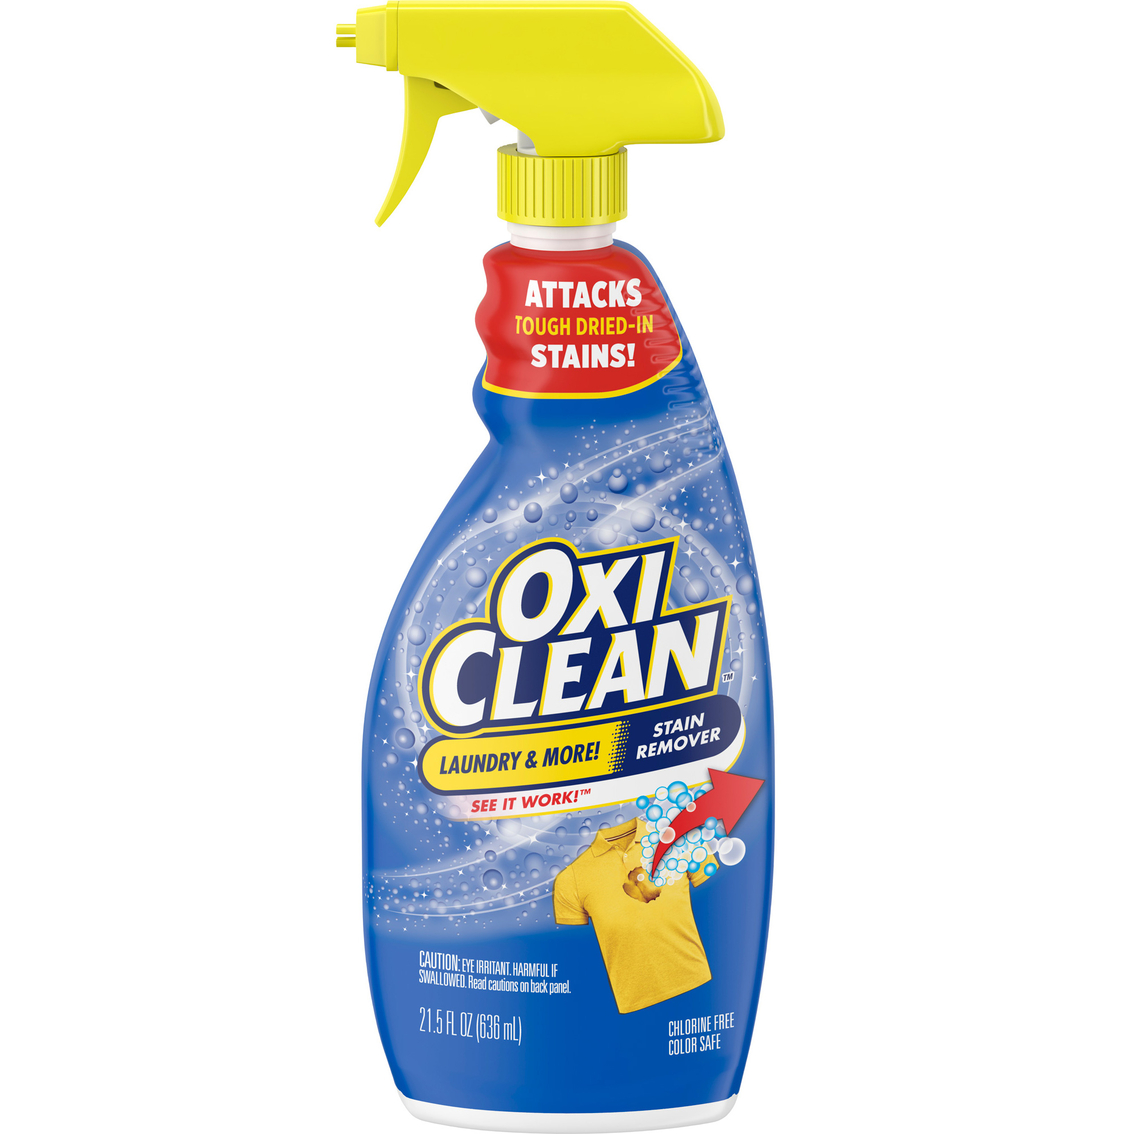 OxiClean Laundry Stain Remover Spray 21.5 Oz.